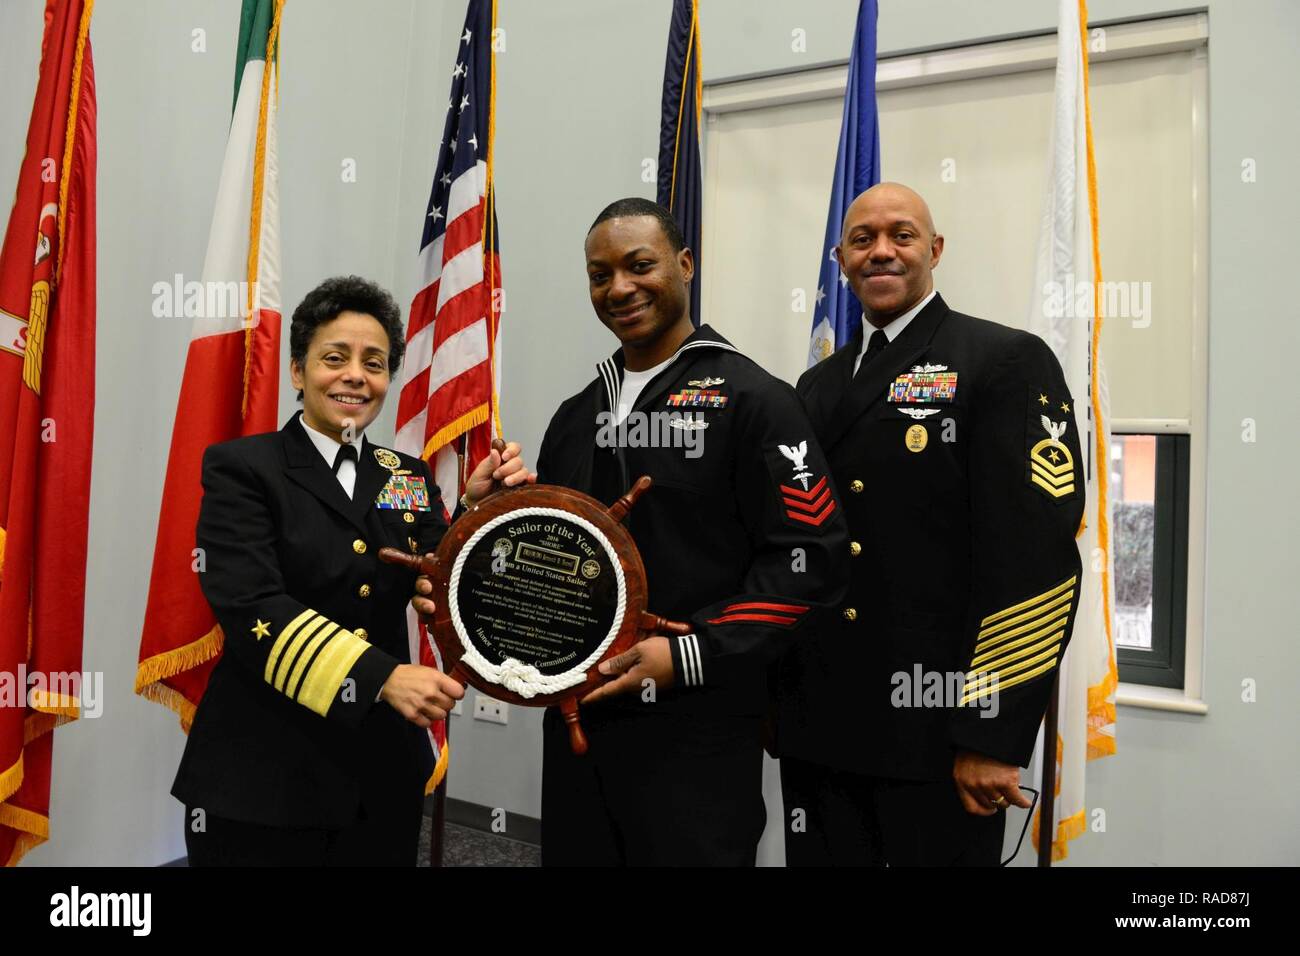 NAVAL SUPPORT ACTIVITY NAPLES, Italy (Jan. 27, 2017) From left to right: Commander, U.S. Naval Forces Europe-Africa, Adm. Michelle Howard; U.S. Naval Forces Europe-Africa Shore Sailor of the Year, Hospital Corpsman 1st Class Kenneth Terrell; and U.S. Naval Forces Europe-Africa Fleet Master Chief Raymond D. Kemp Sr. pose for a photo as Howard presents Terrell with a plaque at the Commander, U.S. Naval Forces Europe-Africa Sailor of the Year ceremony Jan. 27, 2017.  U.S. Naval Forces Europe-Africa, headquartered in Naples, Italy, oversees joint and naval operations, often in concert with allied, Stock Photo